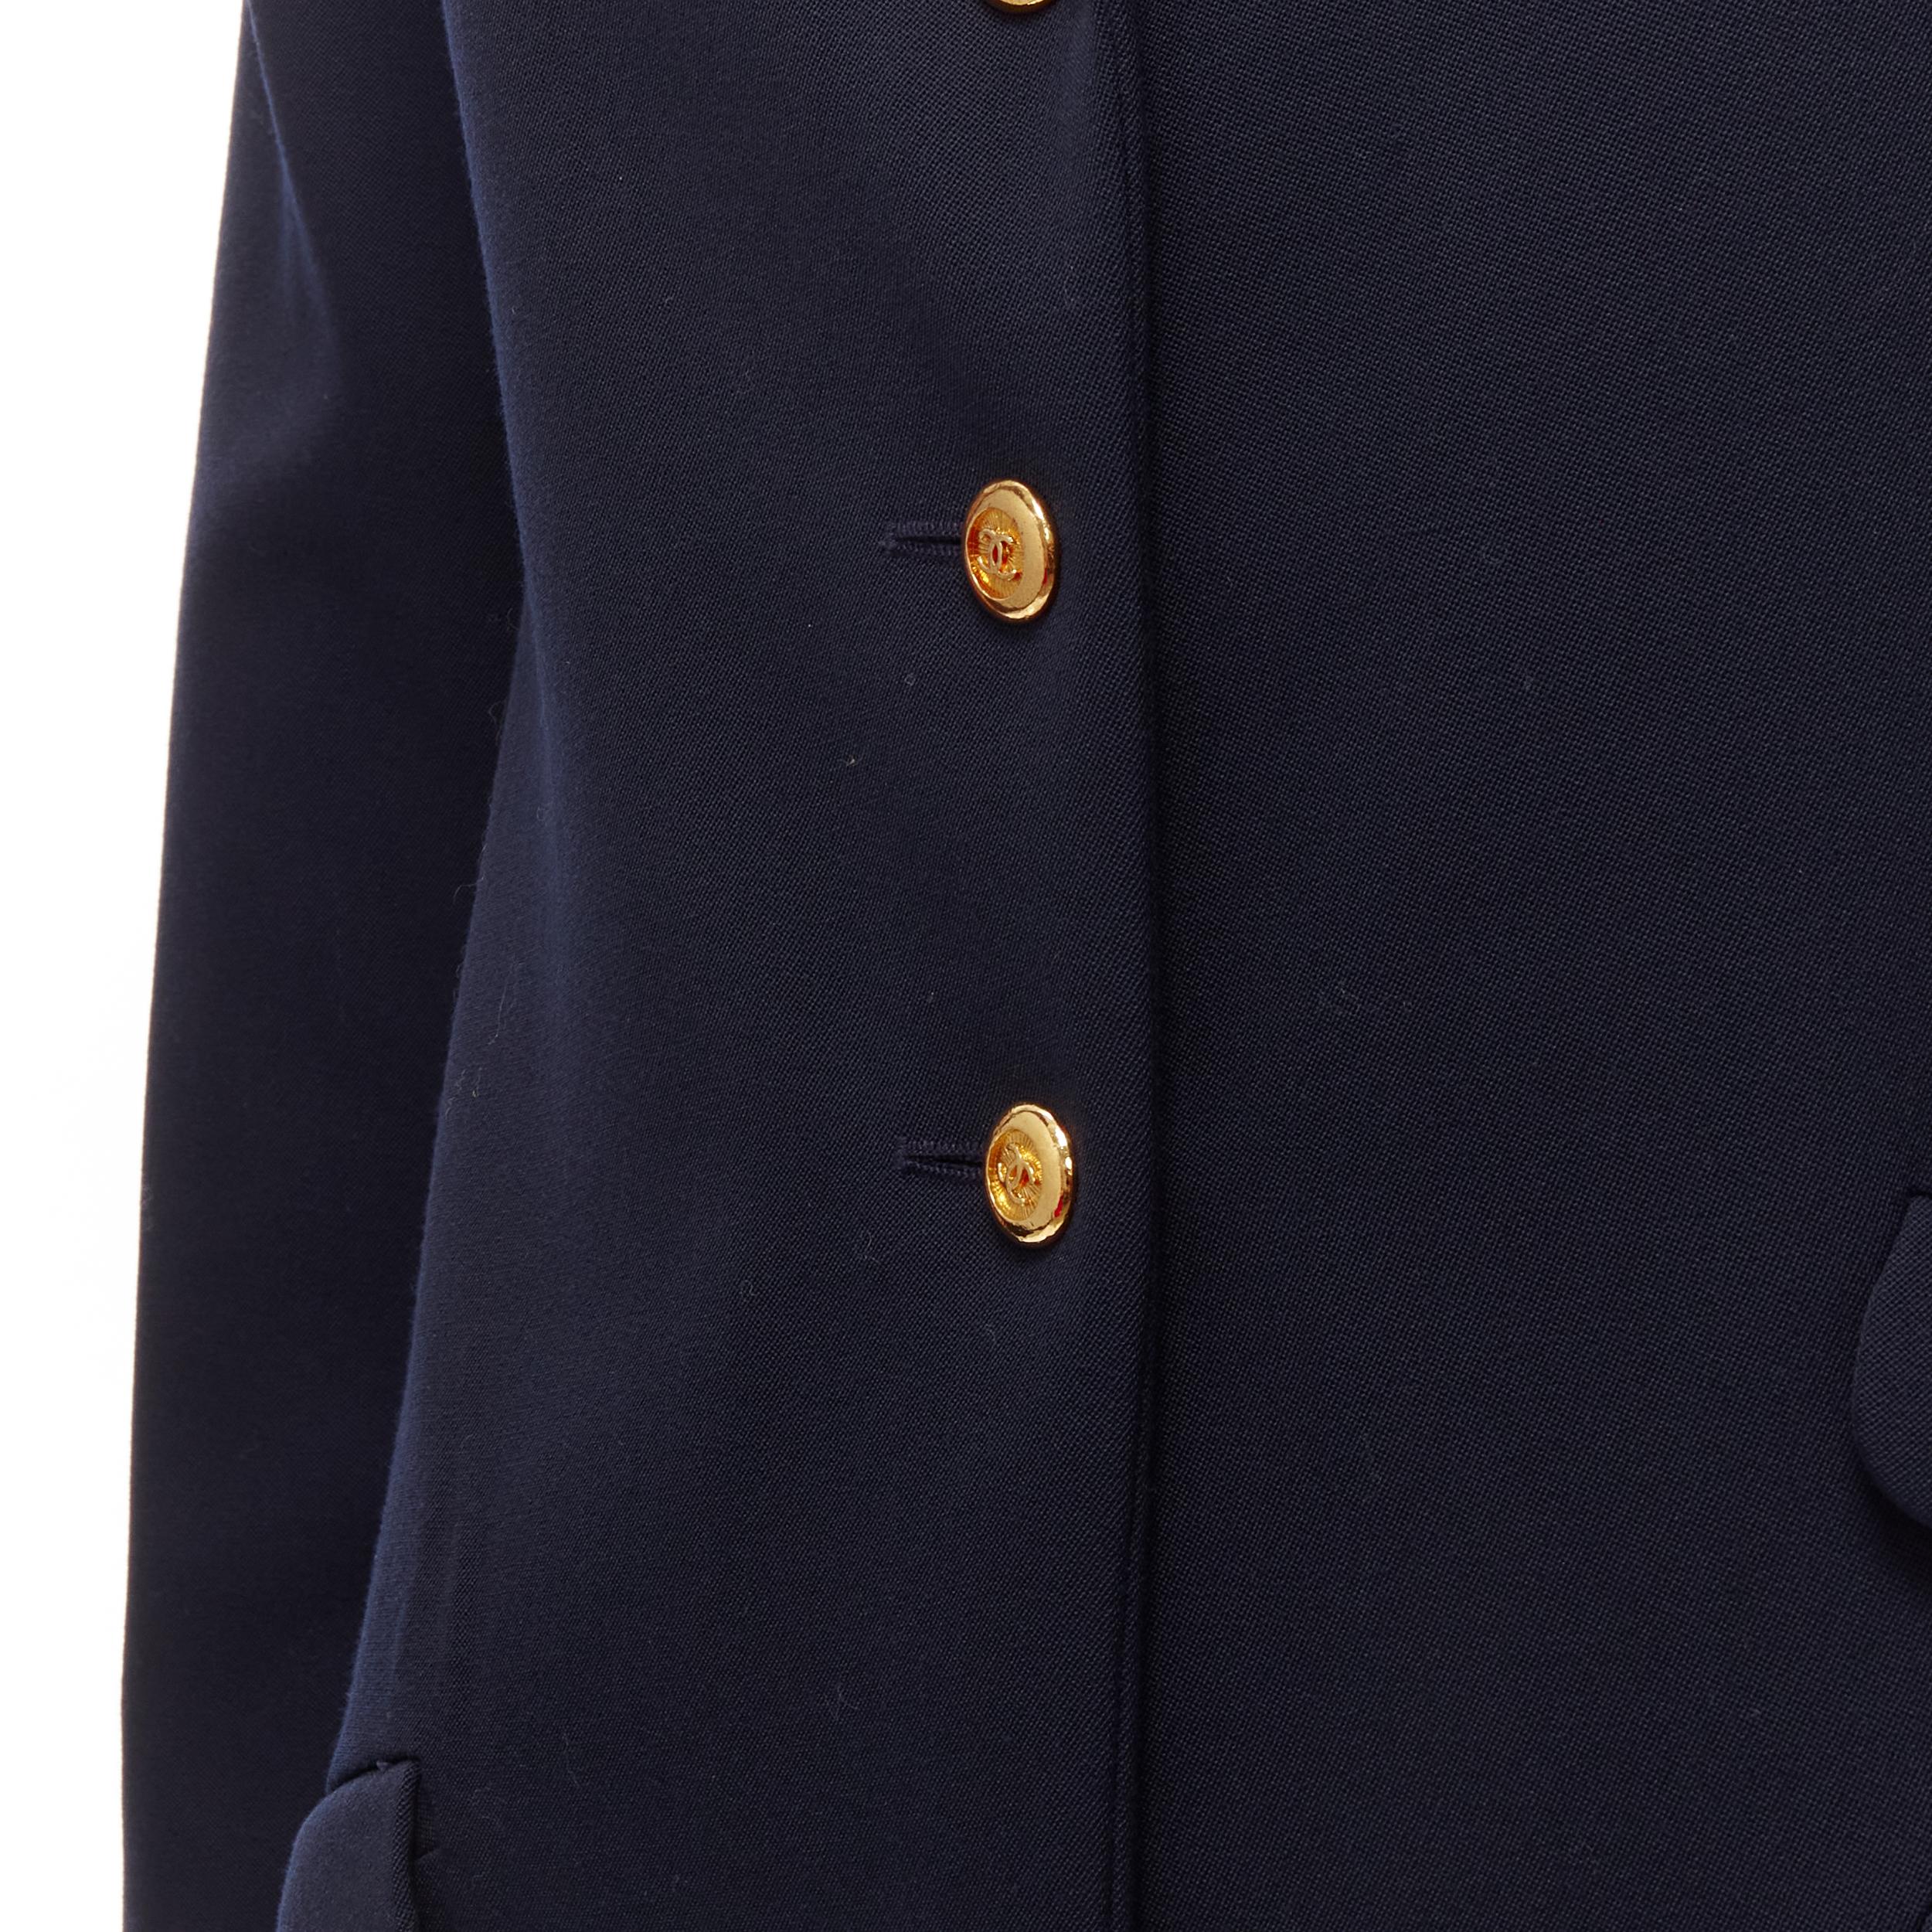 CHANEL navy gold CC buttons flap pockets military blazer jacket FR38 M
Reference: LNKO/A02112
Brand: Chanel
Designer: Karl Lagerfeld
Material: Feels like wool
Color: Navy, Gold
Pattern: Solid
Closure: Button
Lining: Navy Silk
Extra Details: CC logo